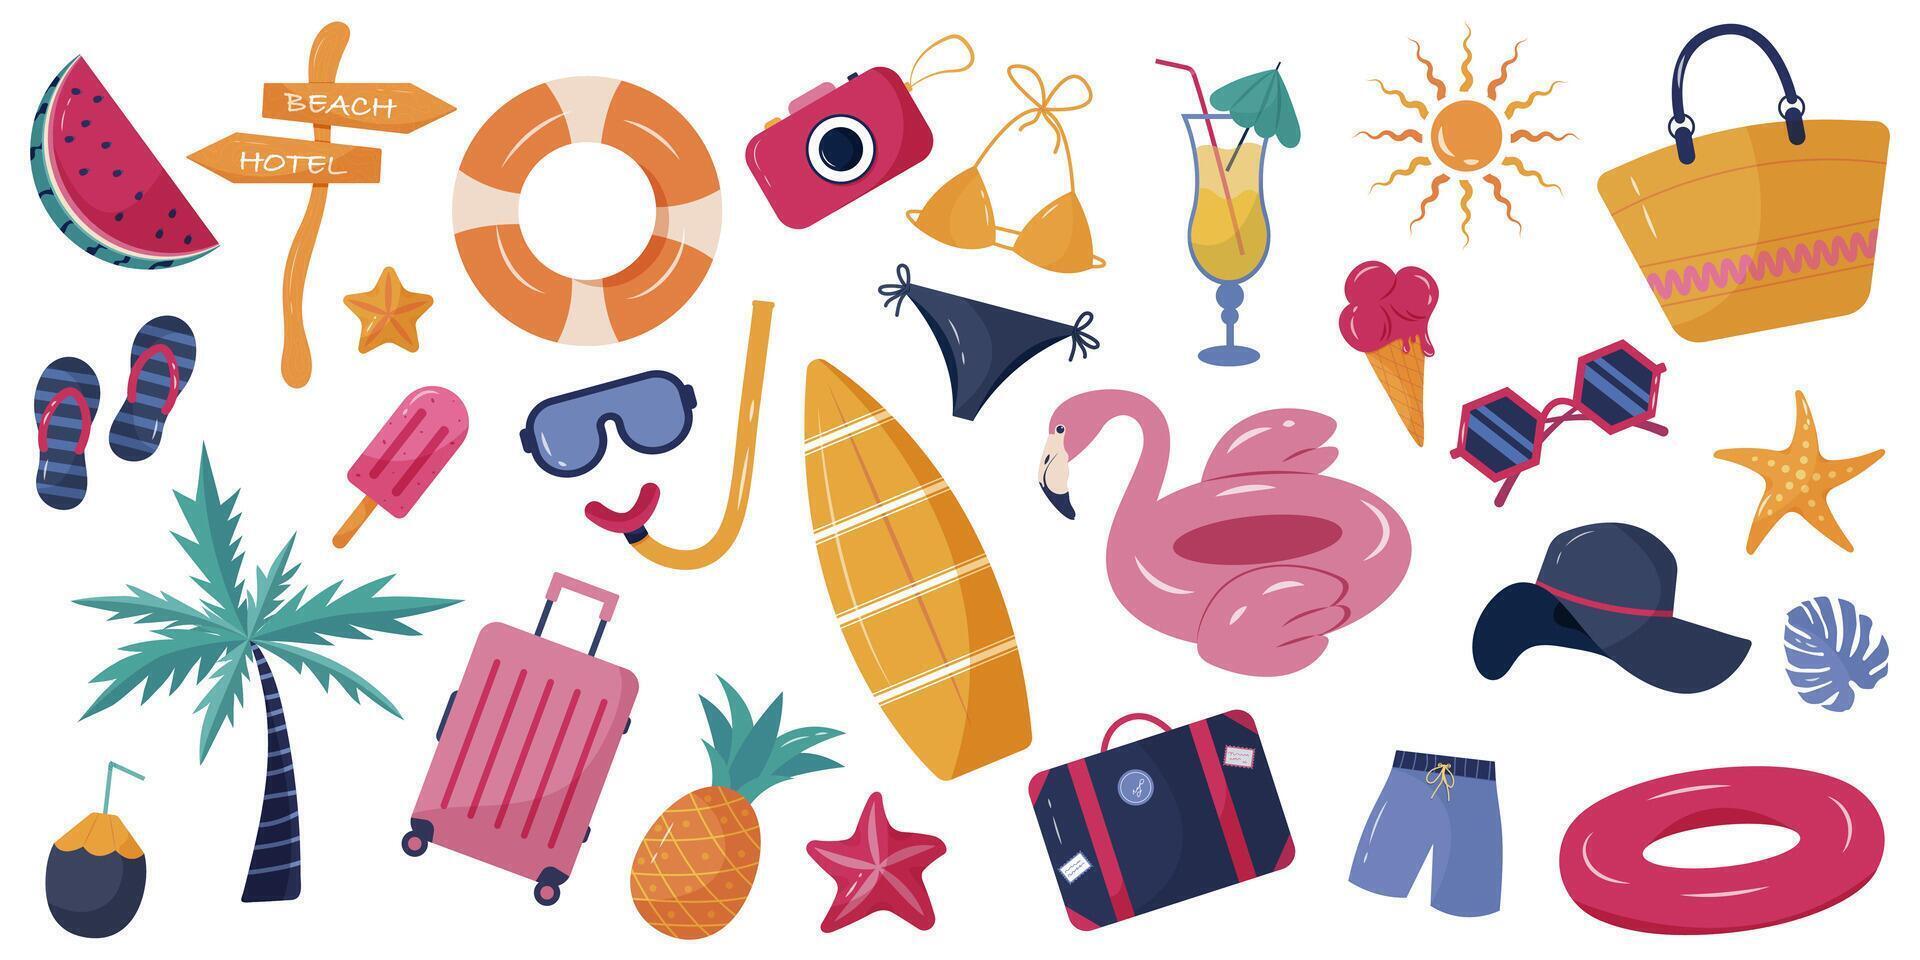 Big collection of summer beach elements, luggage and travel accessories with swimming suits, flamingo cocktails and watermelons. Flat illustration set on white background. Hand drawn vector